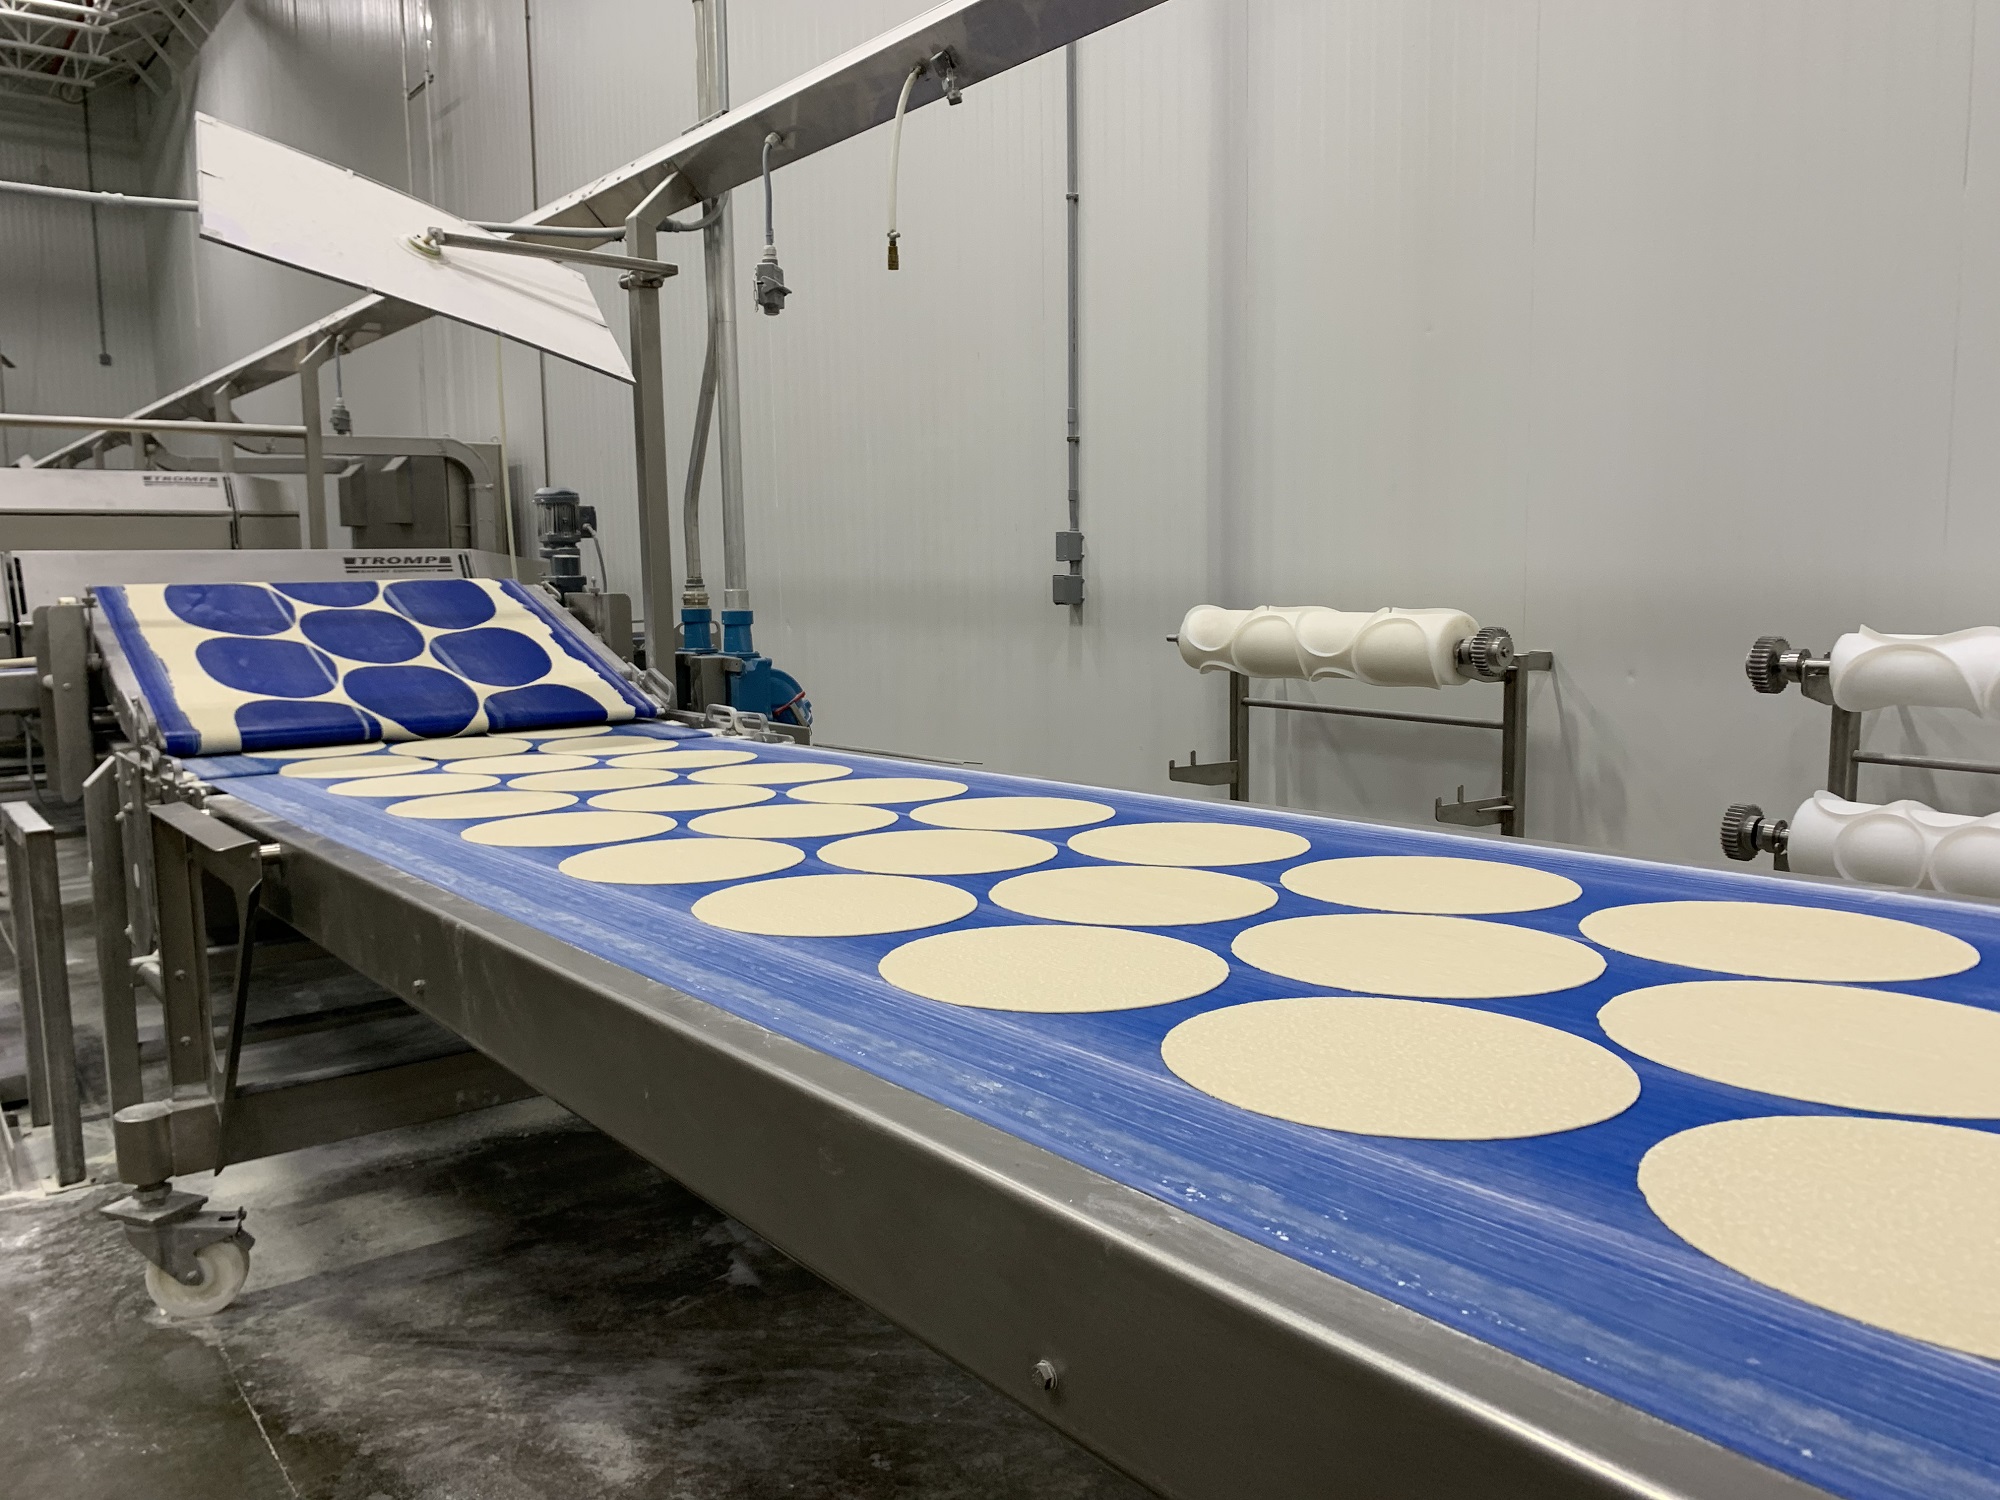 Inside Bernatello’s facility a machine rolls dough flat and cuts out pizza-sized circles for baking. (Photo by Jana Rose Schleis)